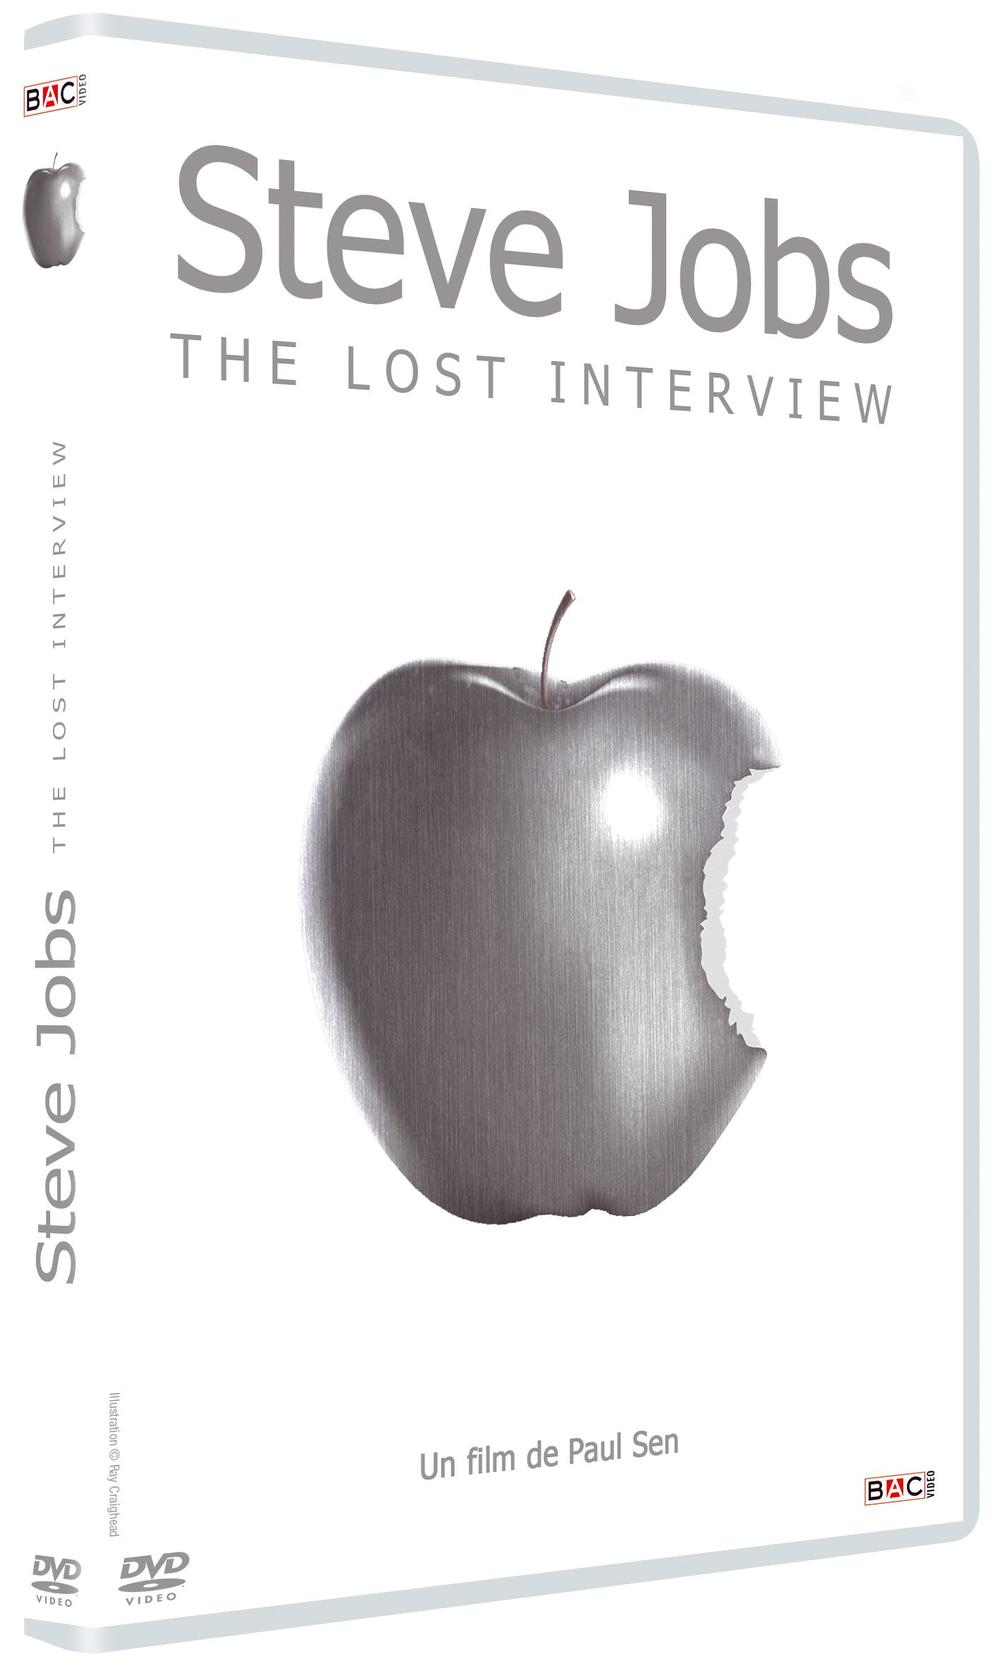 STEVE JOBS, THE LOST INTERVIEW